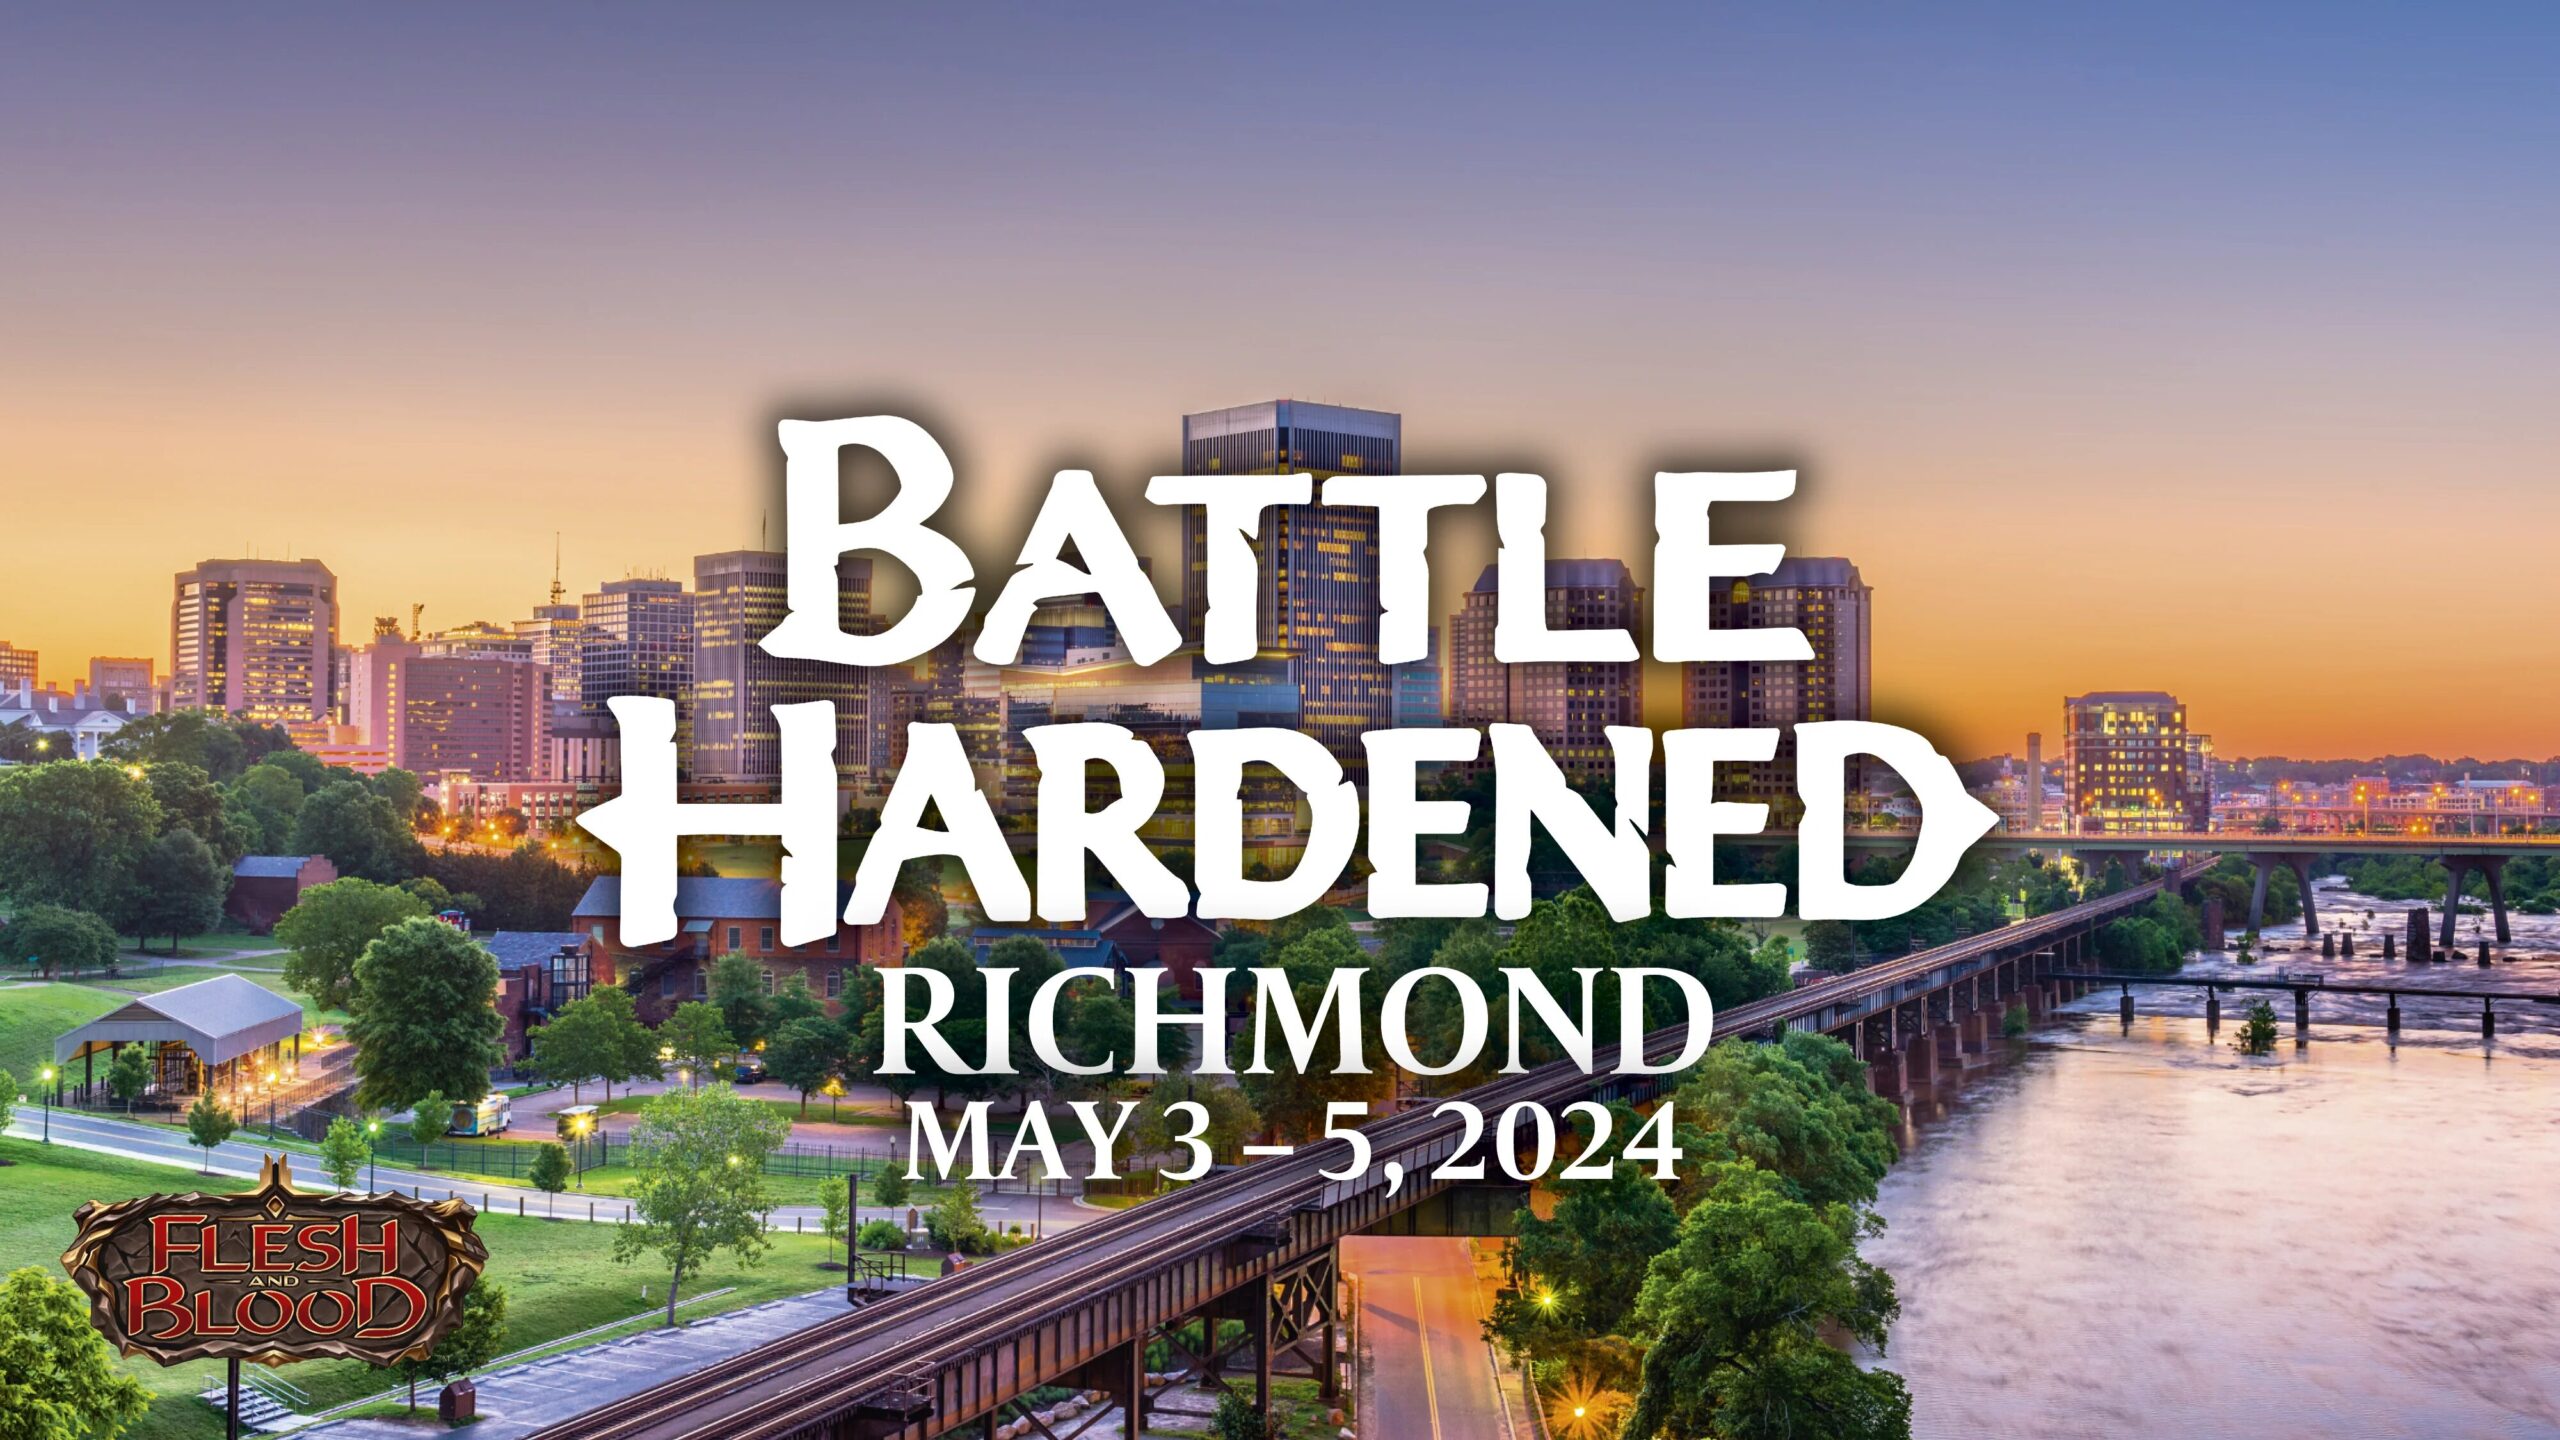 【Battle Hardened:Richmond】優勝は《Kayo, Armed and Dangerous》！！ProQuest+はKanoが優勝！